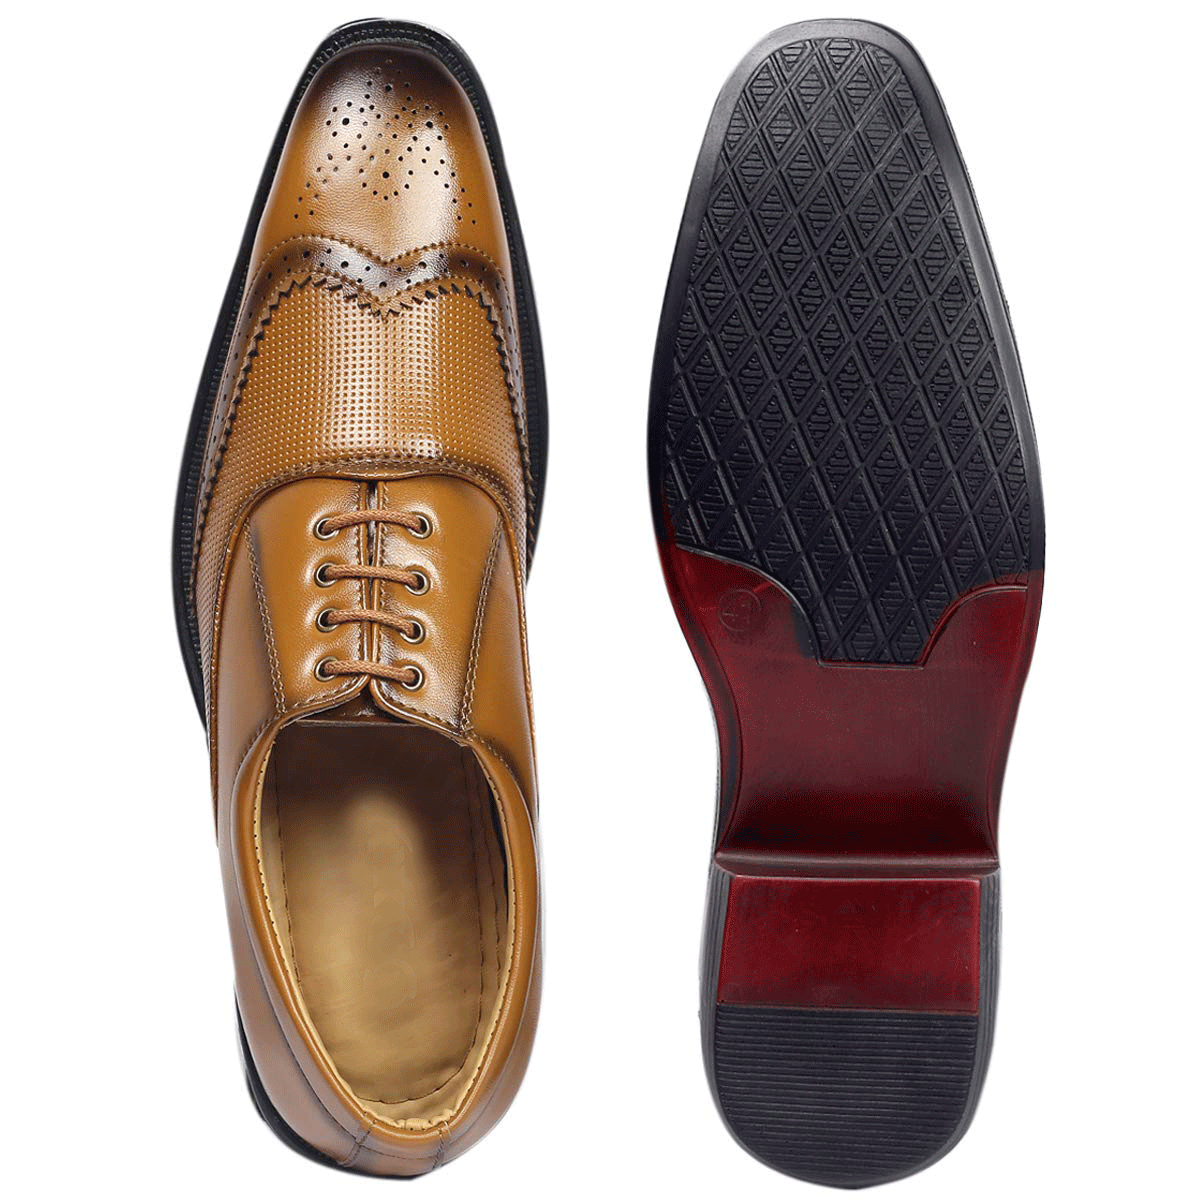 Height Increasing Tan Casual And Formal Lace-Up Shoes For Men-Unique and Classy